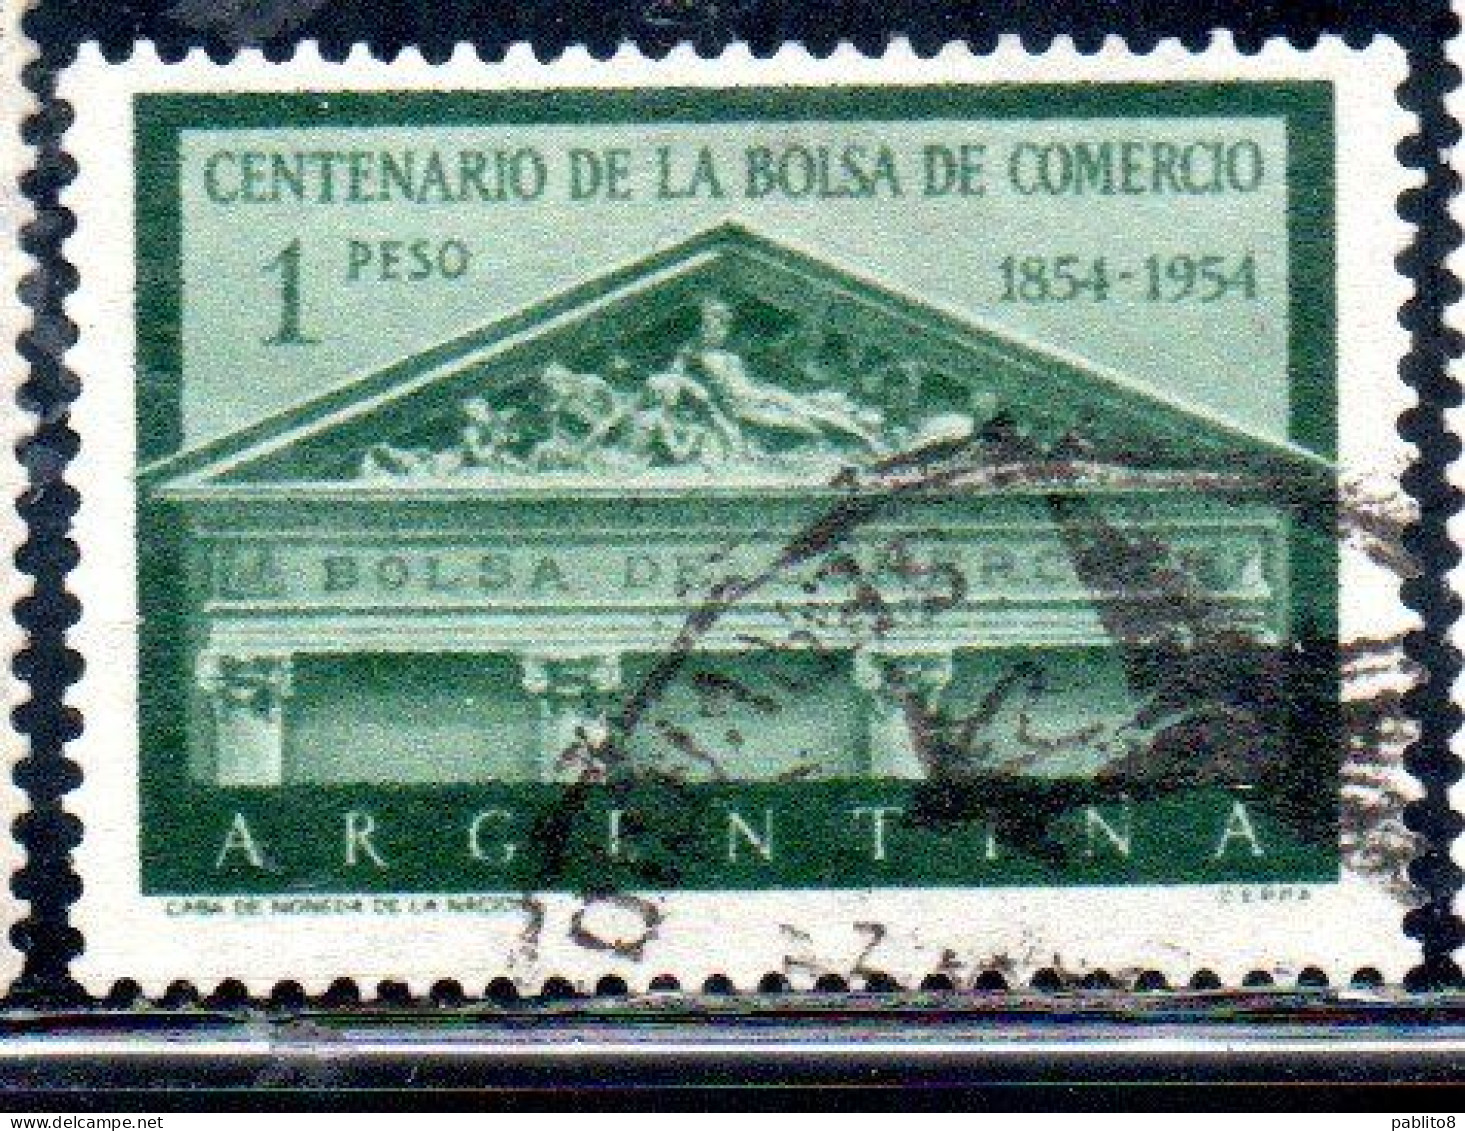 ARGENTINA 1954 ESTABILISHMENT OF THE BUENOS AIRES STOK EXCHANGE 1p USED USADO OBLITERE' - Used Stamps